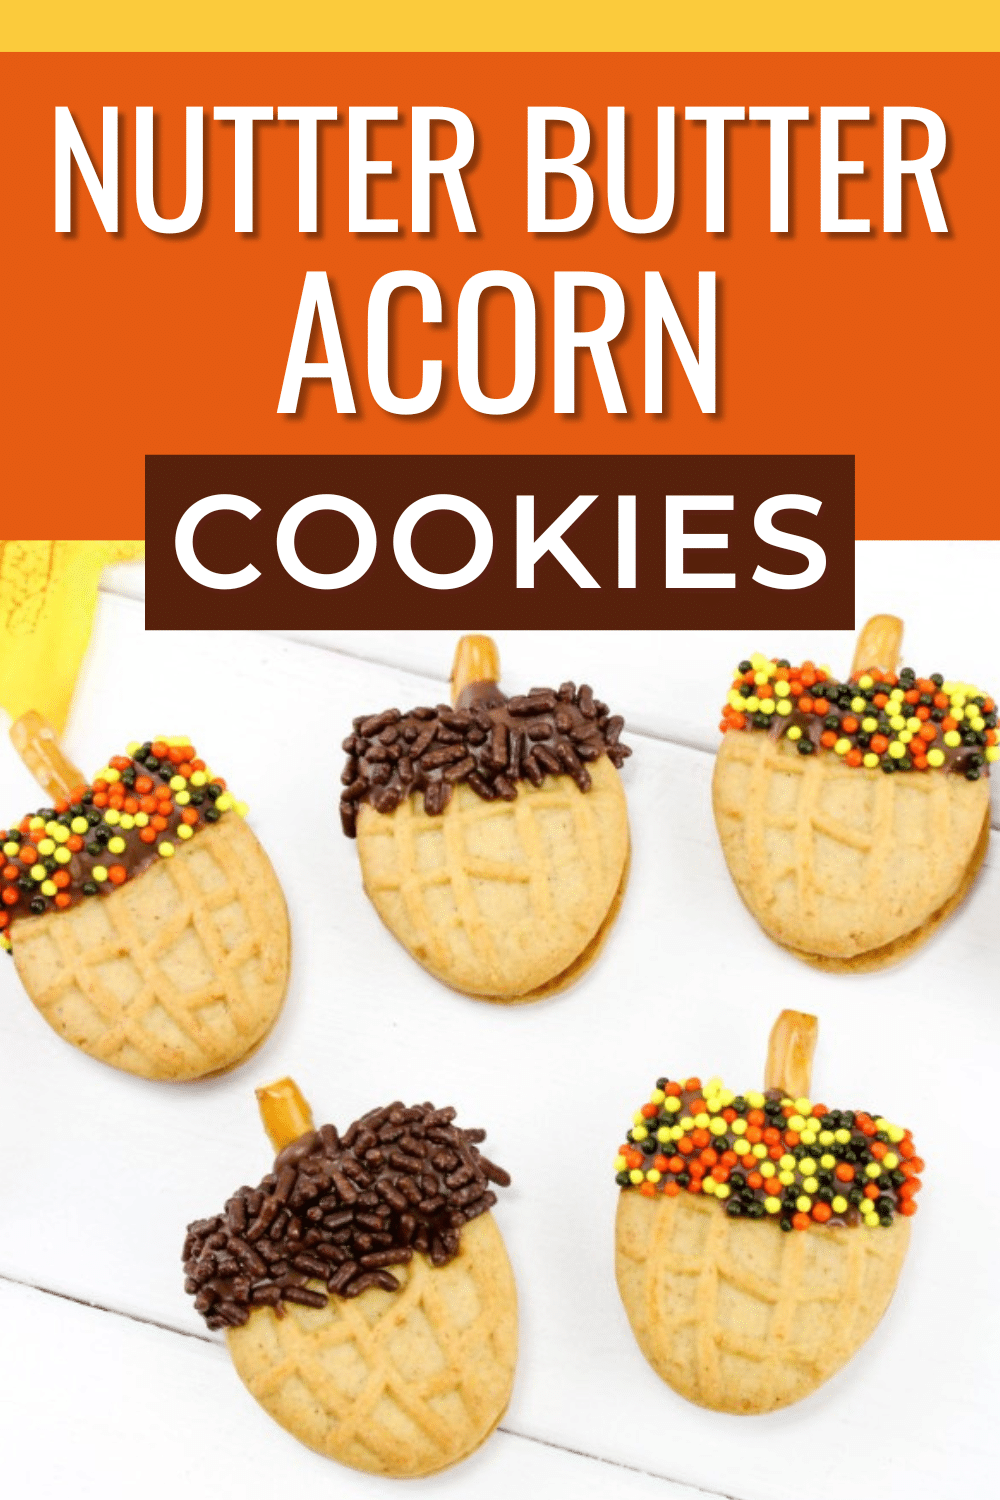 These Nutter Butter Acorns Cookies are perfect for celebrating Fall! Not only are they adorable, they're also so easy to make. #funfood #fallfood #nutterbutter via @wondermomwannab